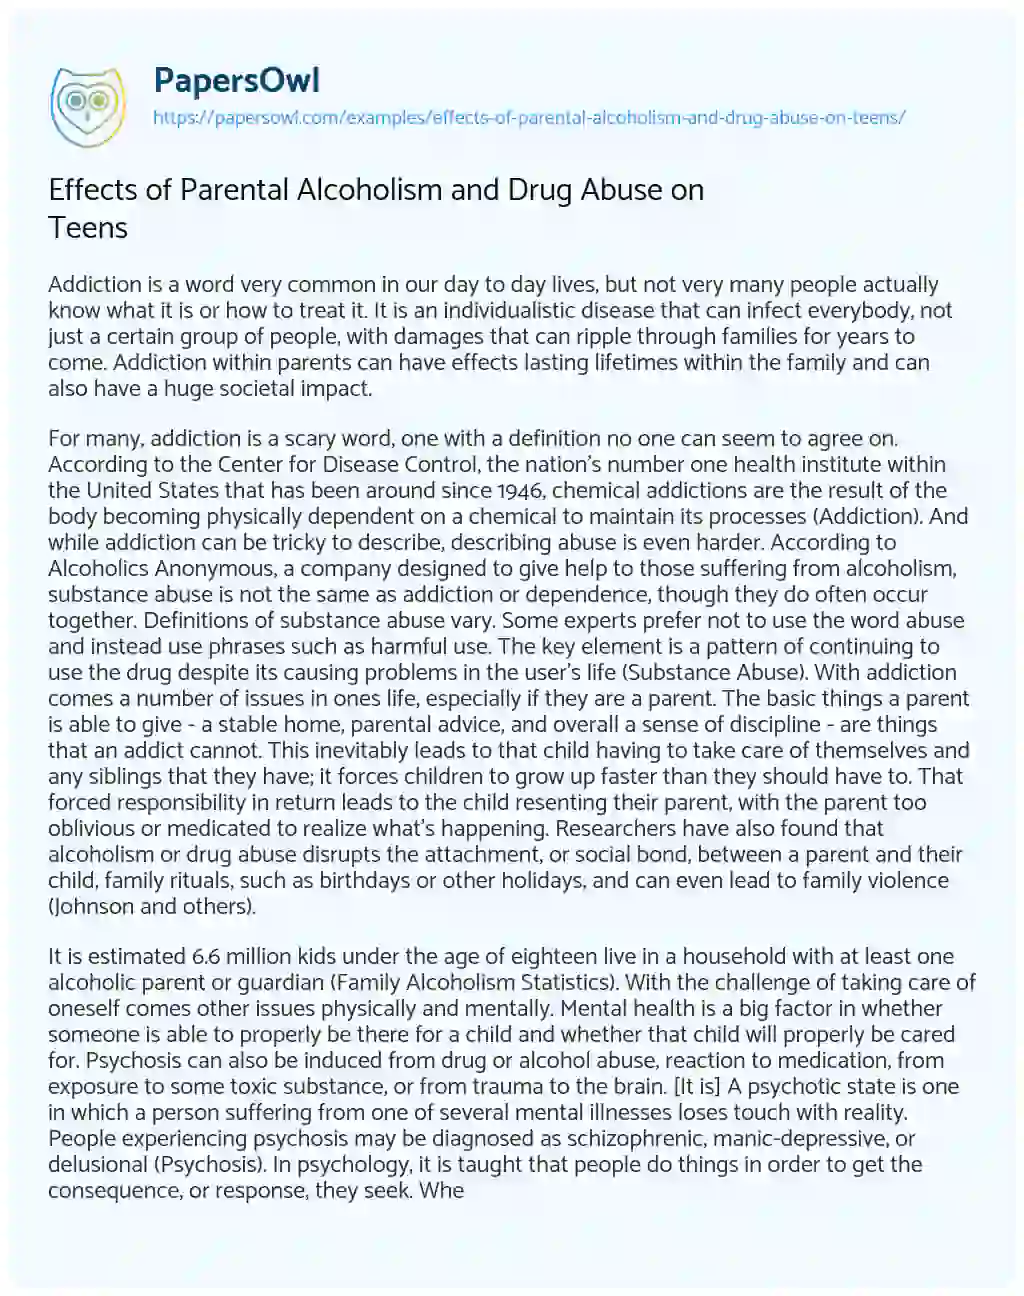 Essay on Effects of Parental Alcoholism and Drug Abuse on Teens